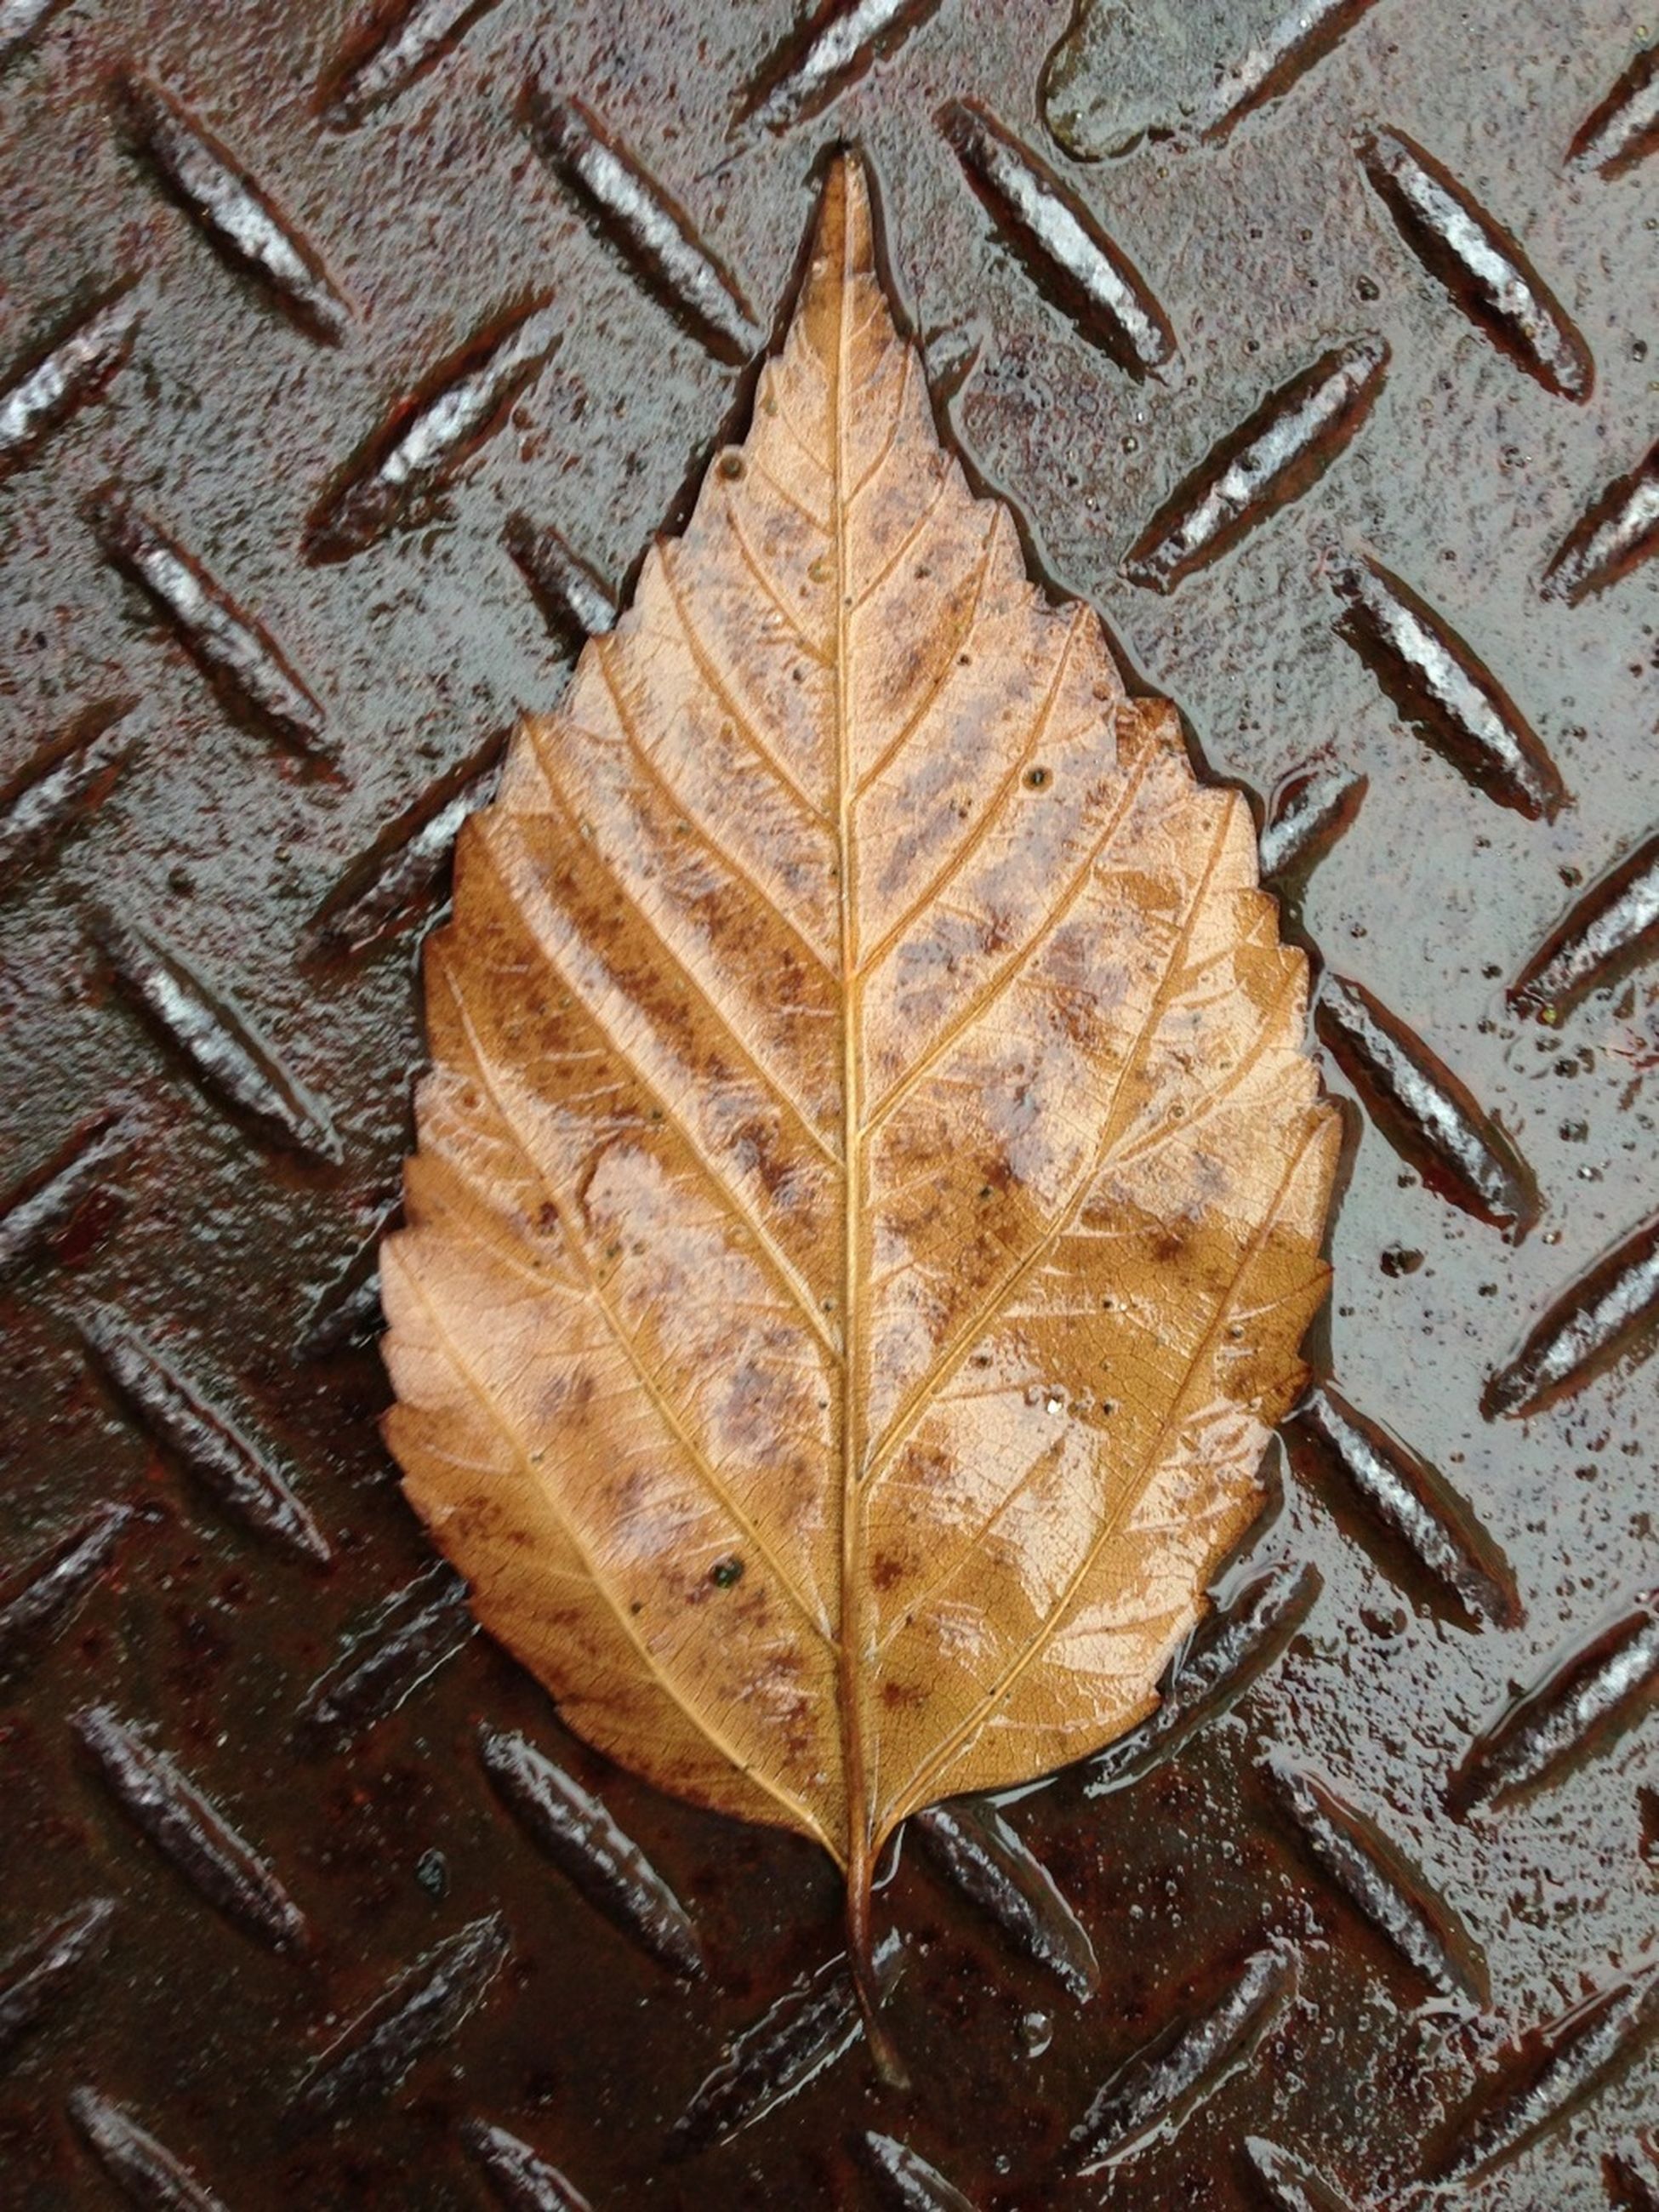 leaf, autumn, high angle view, dry, change, leaf vein, leaves, close-up, natural pattern, pattern, season, full frame, backgrounds, textured, fallen, no people, nature, day, outdoors, brown